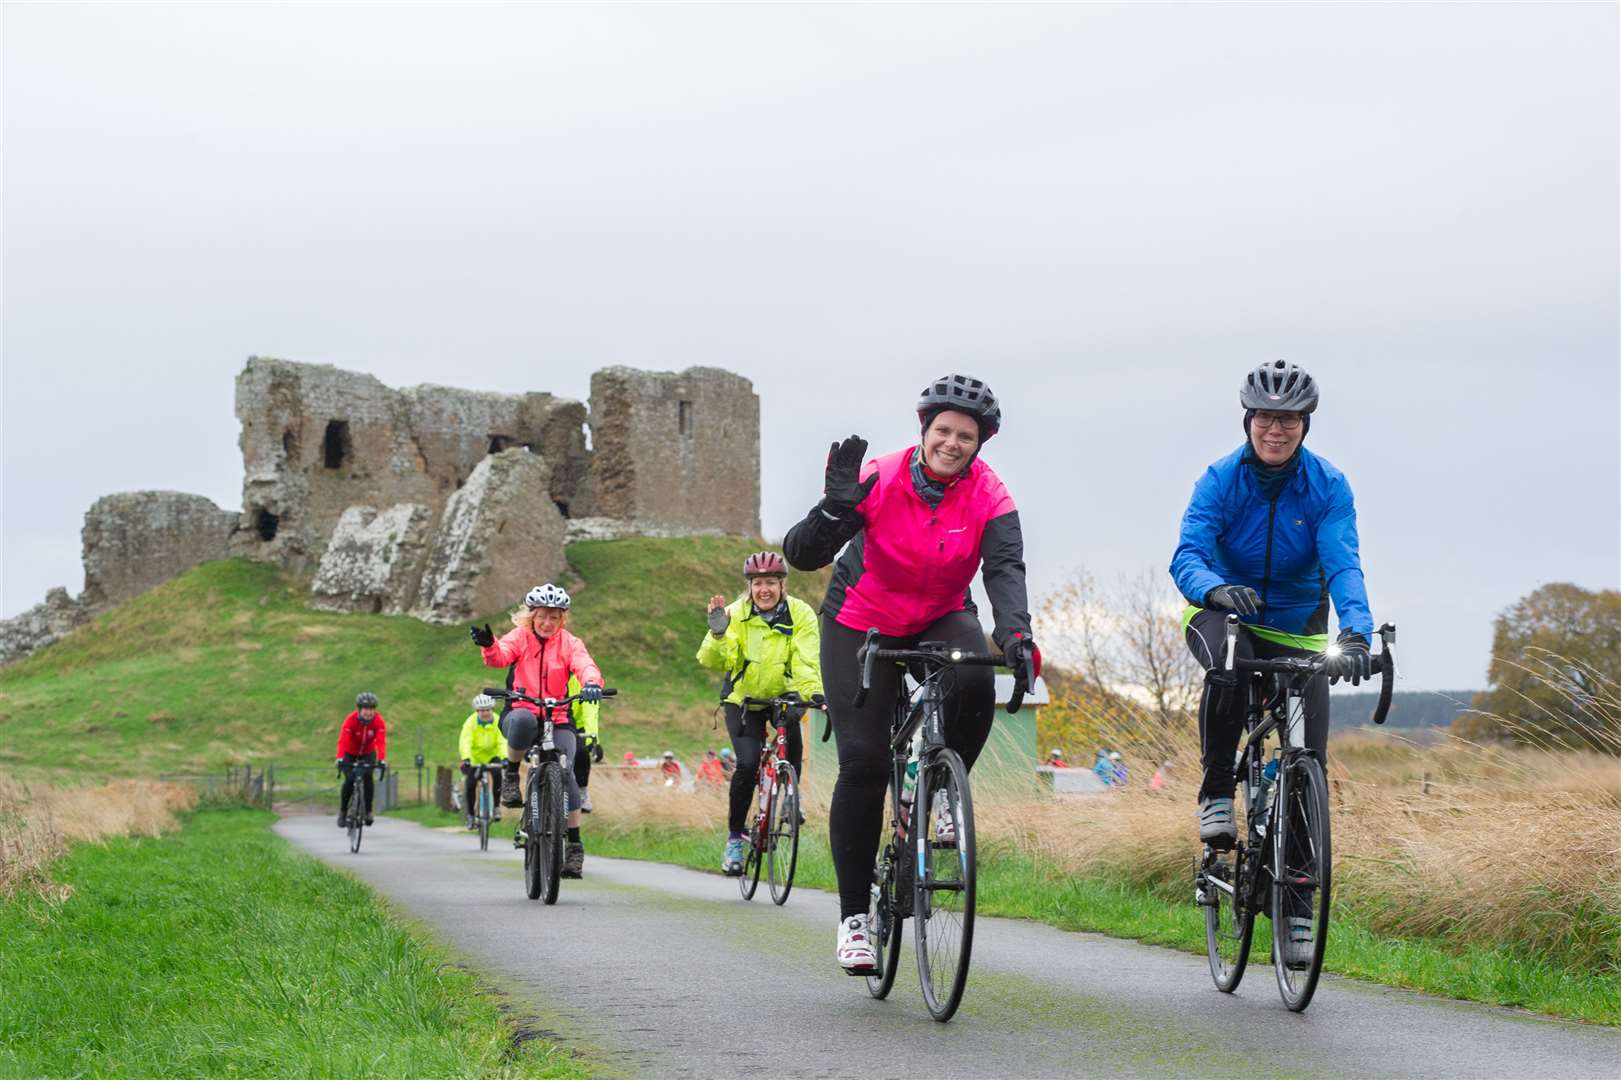 Members of the Elgin and Nairn Breeze groups cycled from Elgin Library to Duffus Castle and back. Picture: Daniel Forsyth.